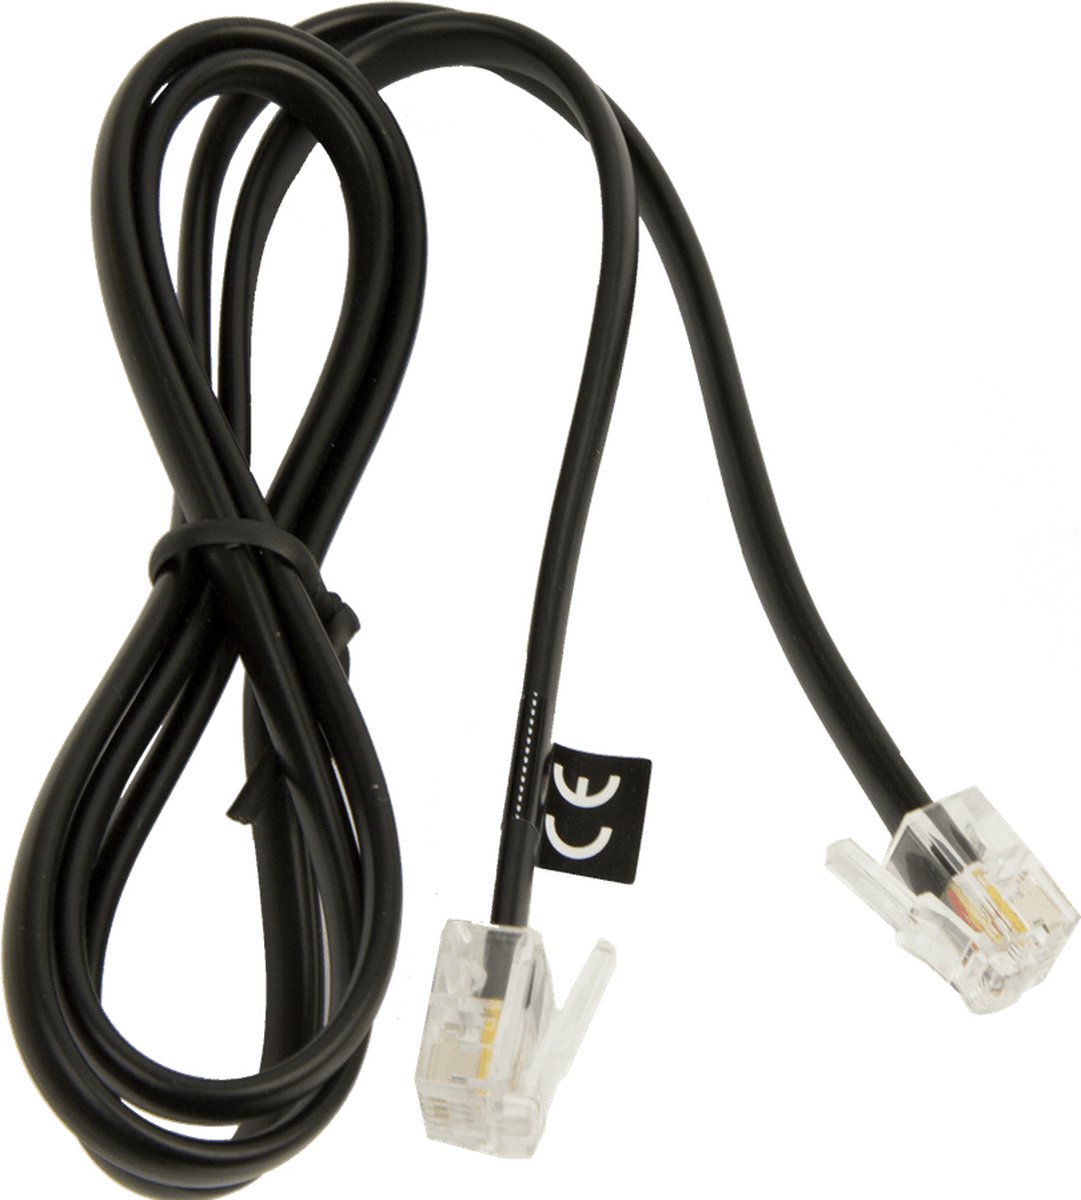 DEALER BOARD CABLE - Gn